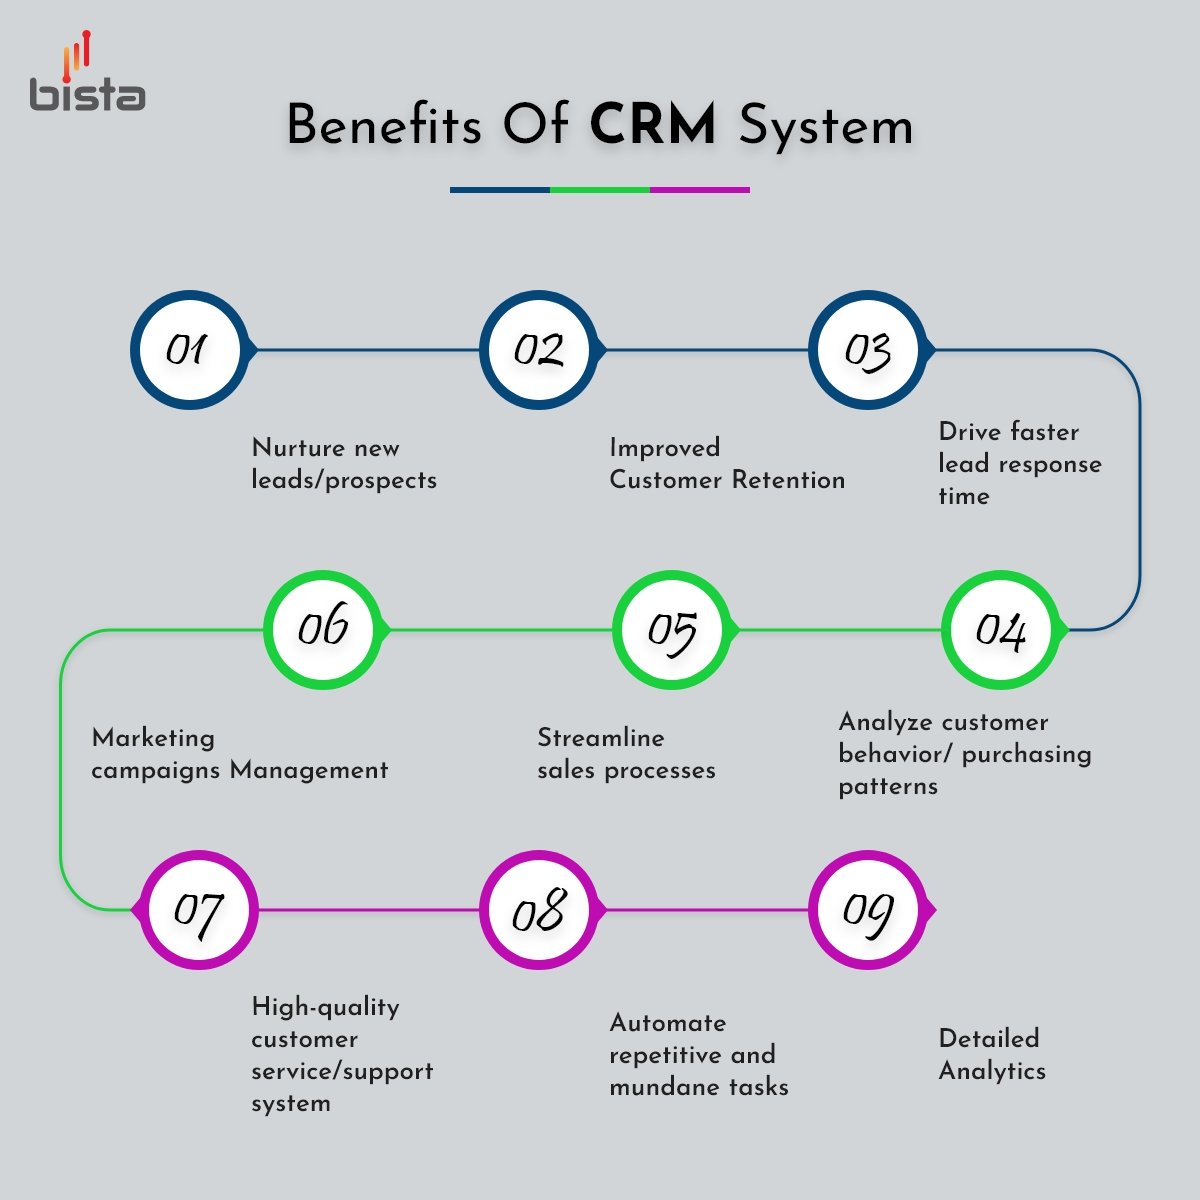 Importance Of CRM System